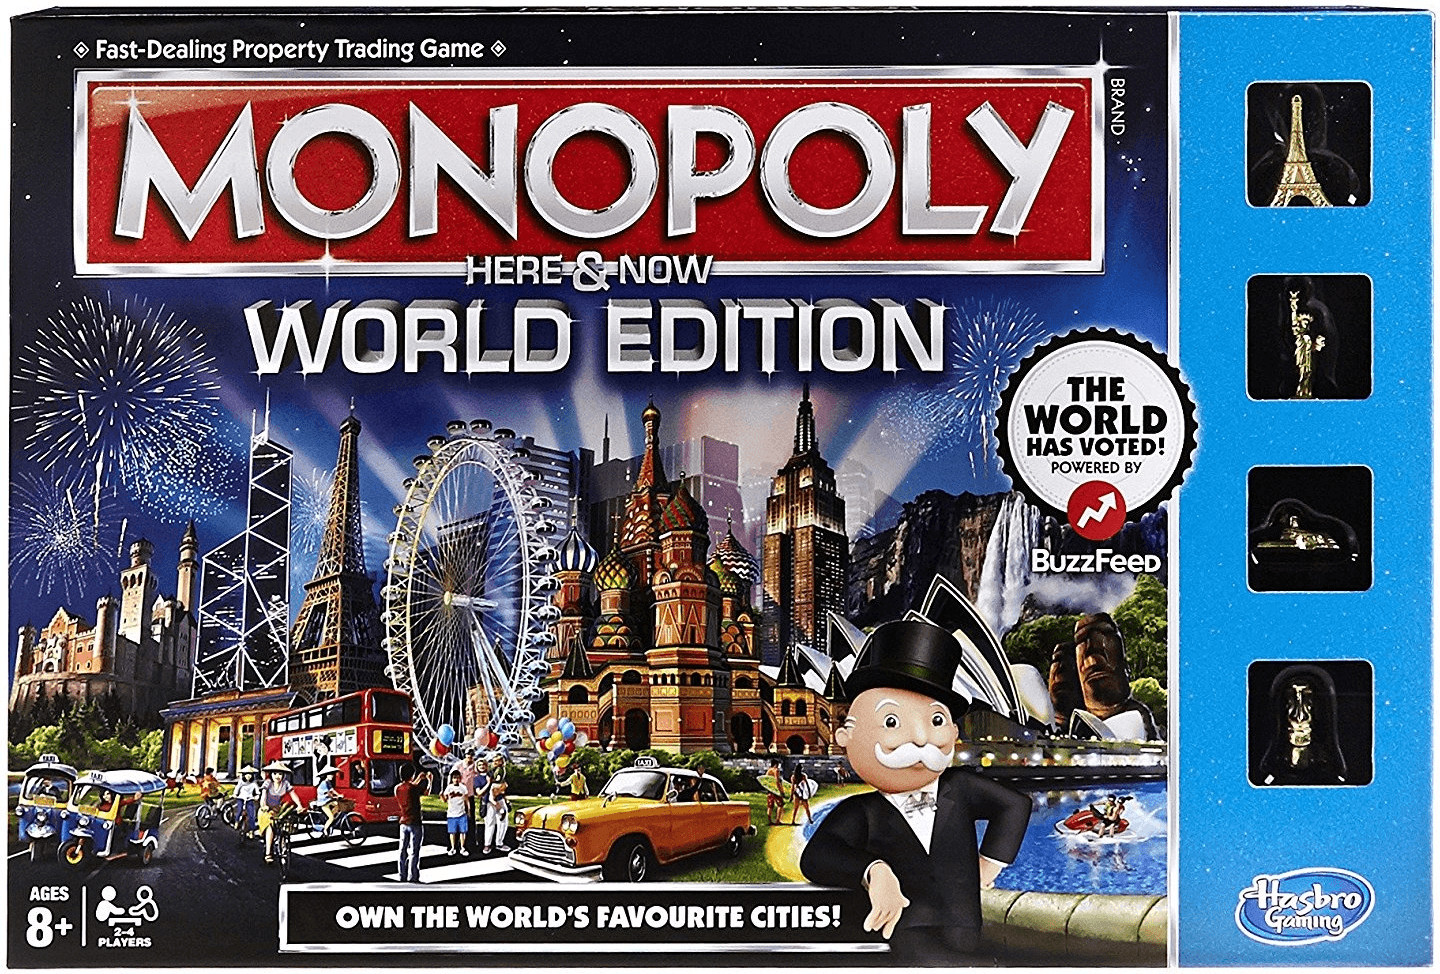 Monopoly Here & Now World Edition